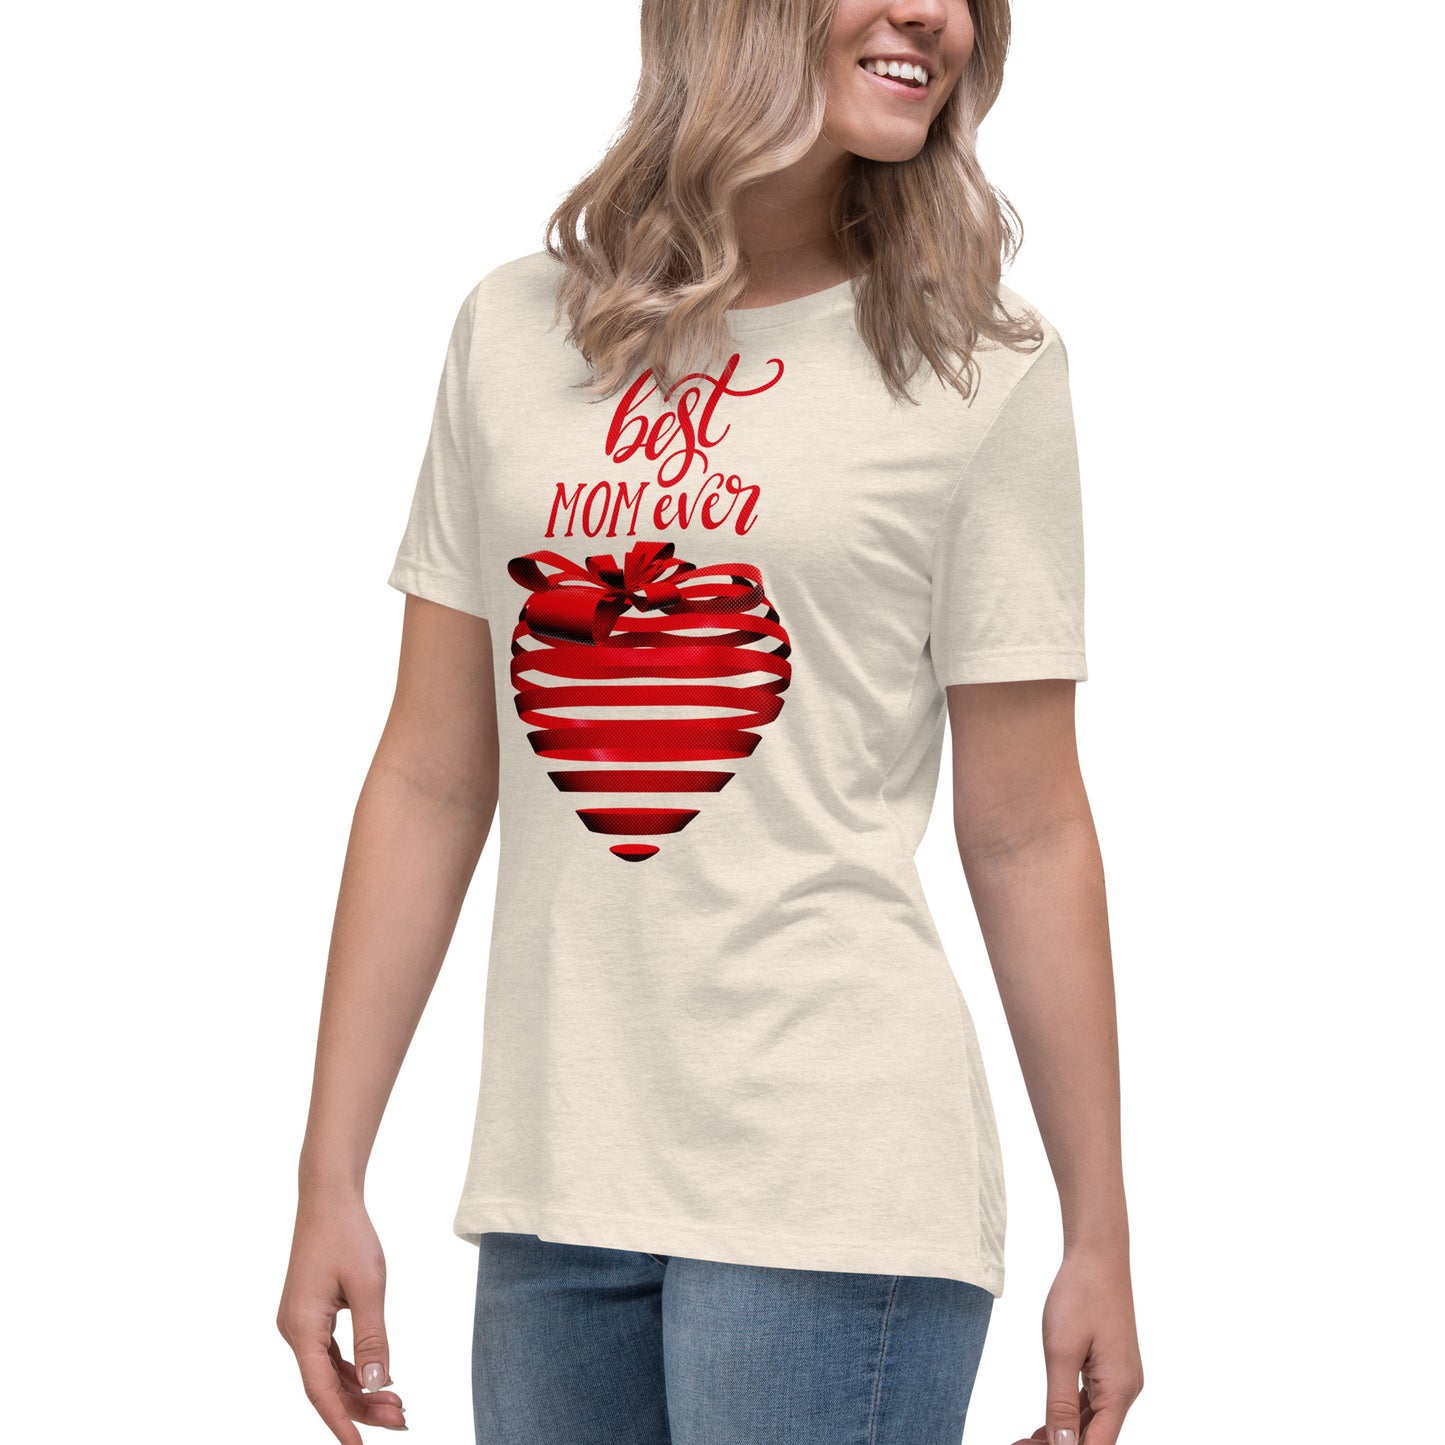 Women with natural T-shirt with red text best MOM Ever and red heart